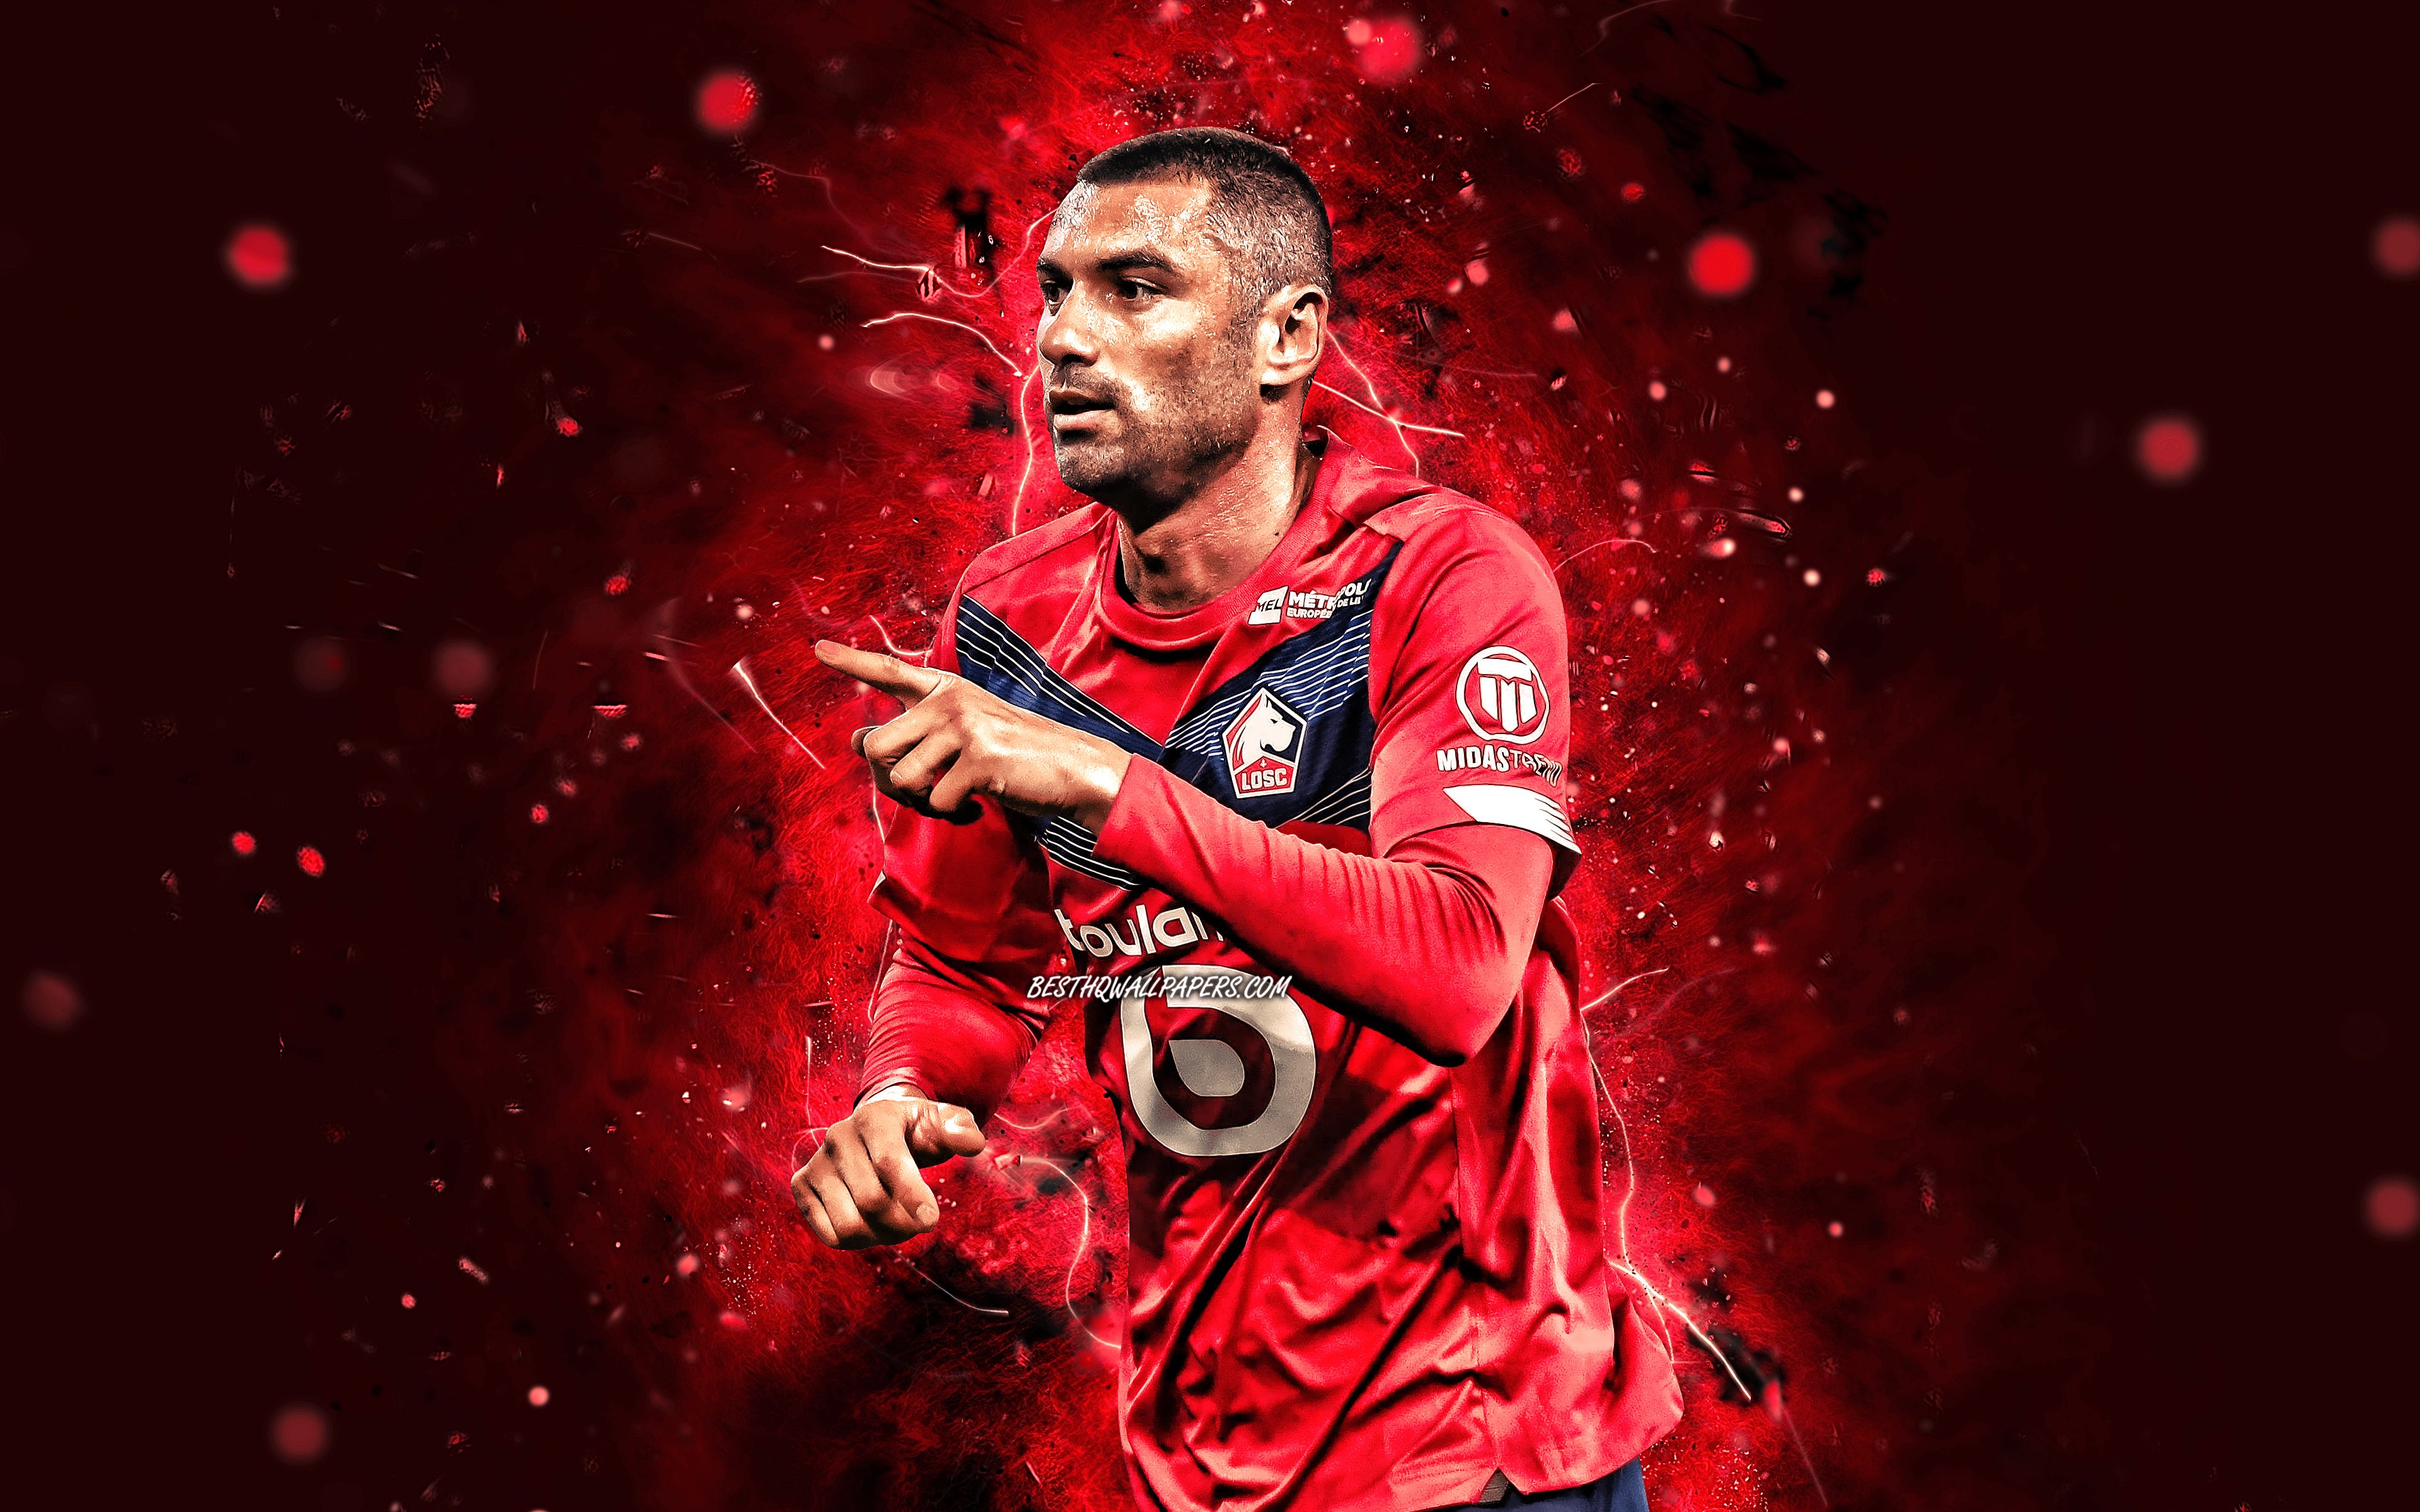 Download wallpaper Burak Yilmaz, 4k, turkish footballers, Lille FC, Ligue red neon lights, soccer, LOSC Lille, Burak Yilmaz 4K, Burak Yilmaz Lille for desktop with resolution 3840x2400. High Quality HD picture